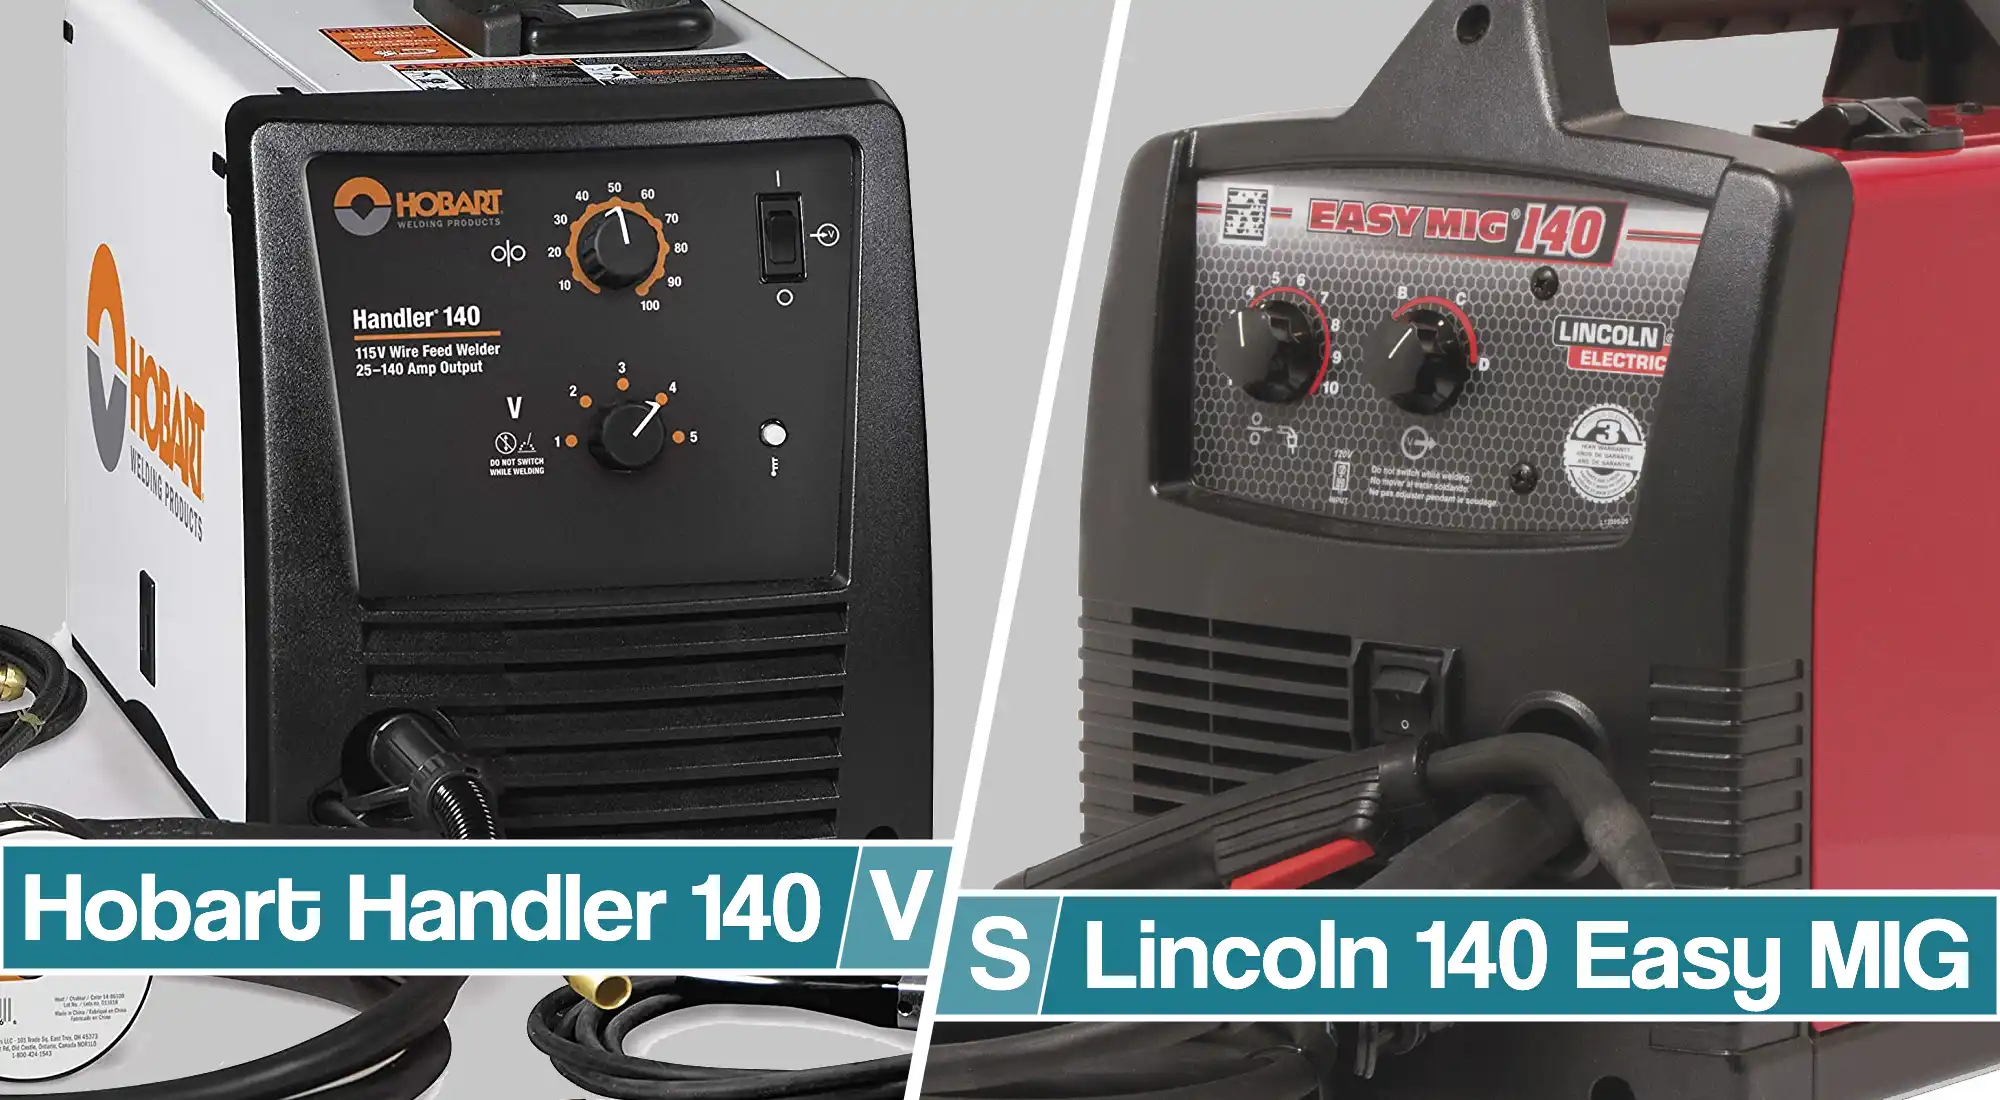 Hobart Handler 140 vs. Lincoln 140 easy MIG – Detailed Head To Head Comparison Of All Key Features